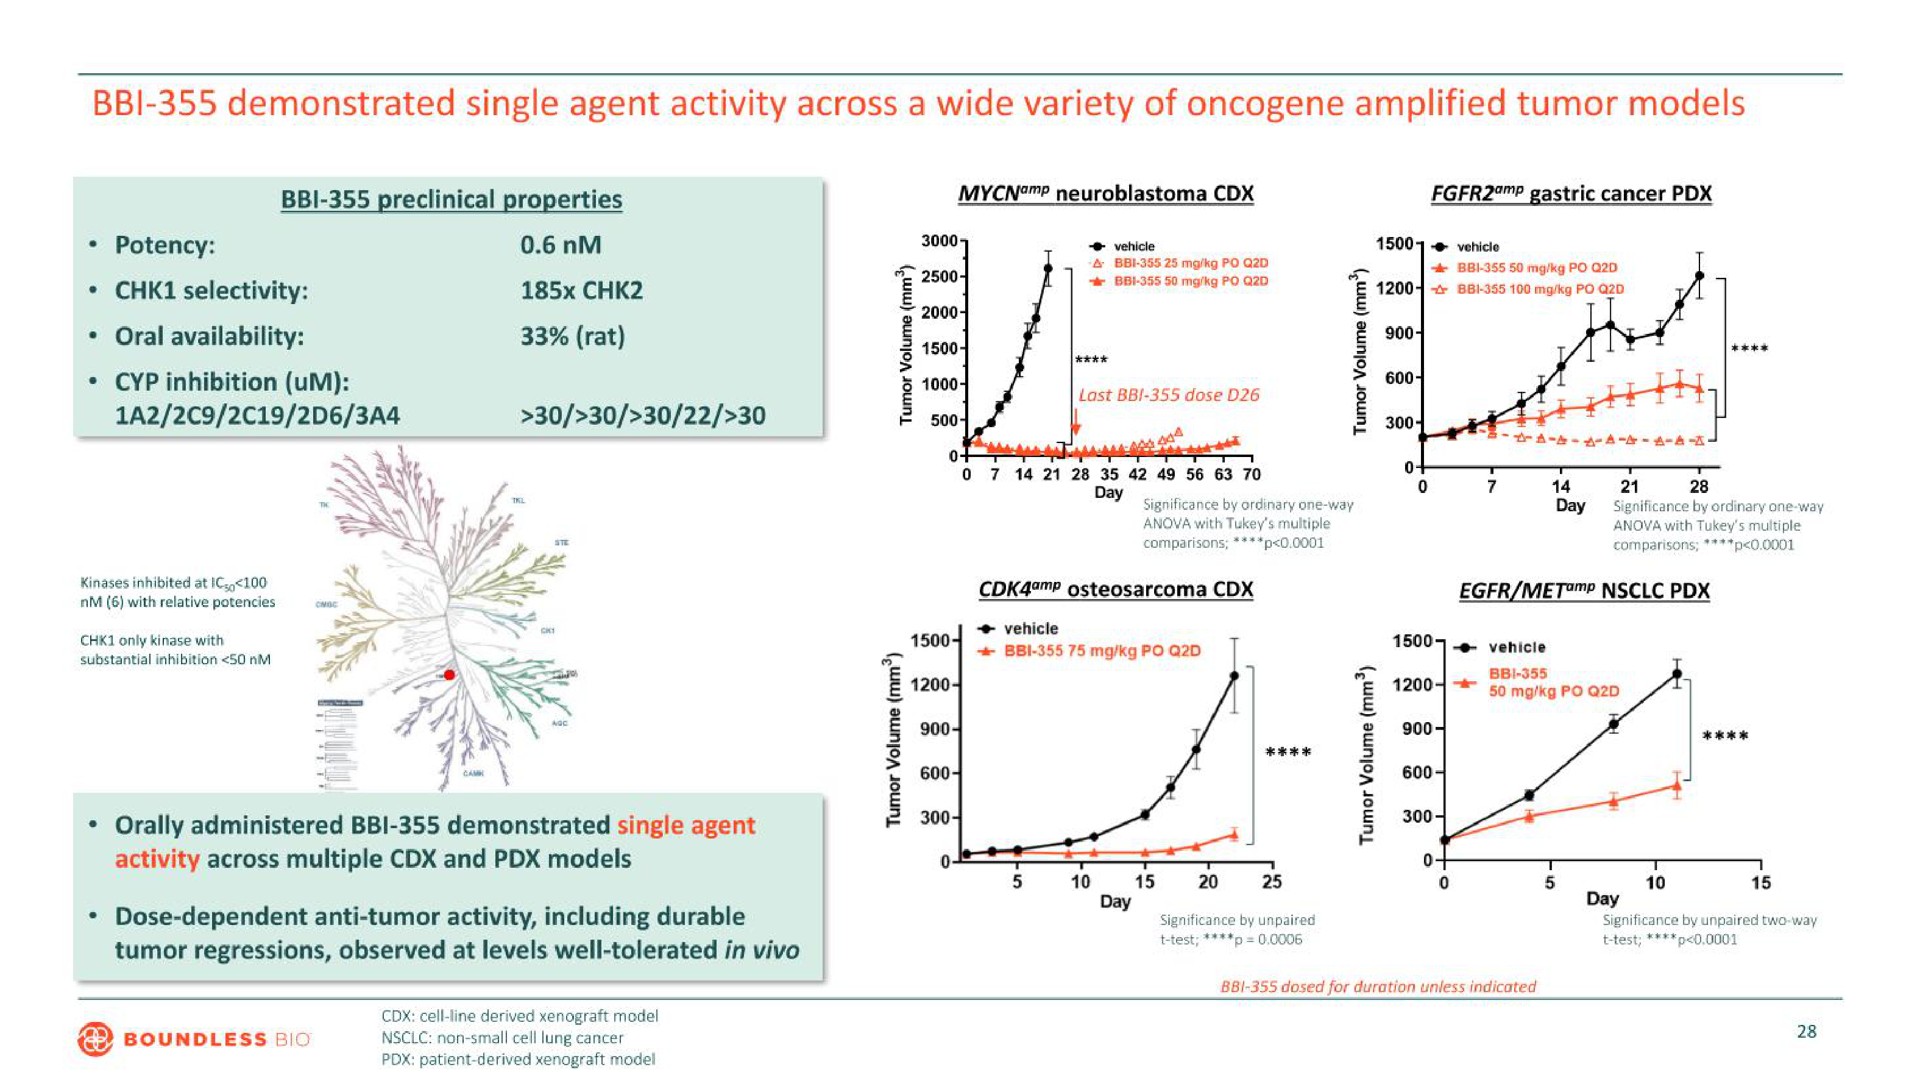 demonstrated single agent activity across a wide variety of amplified tumor models | Boundless Bio